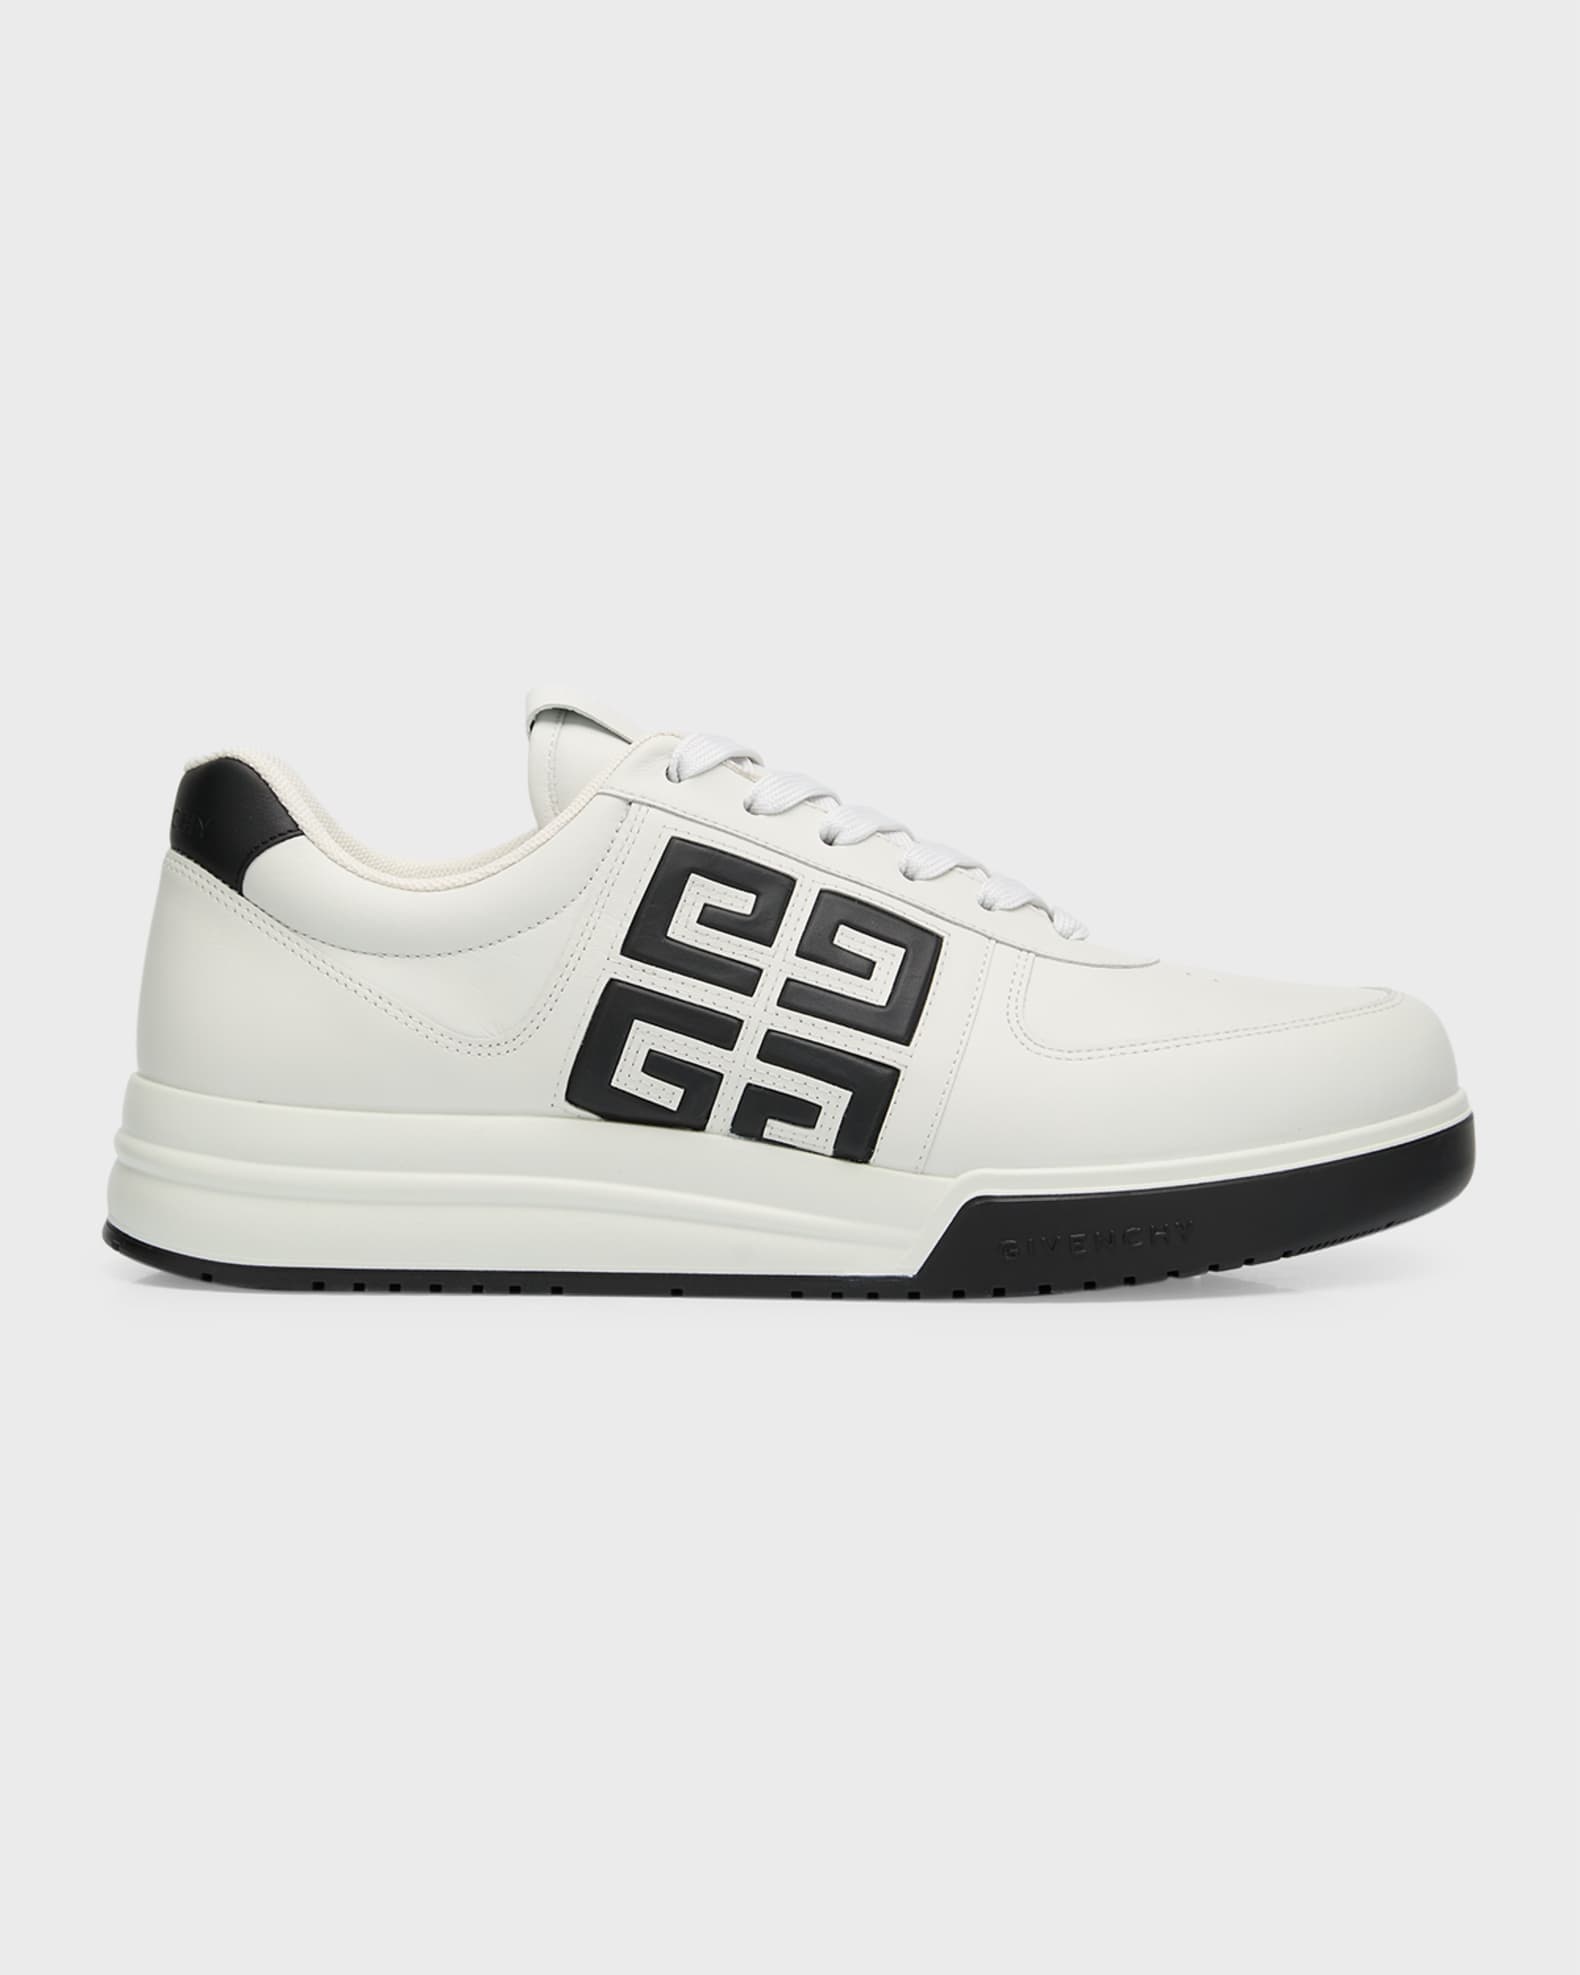 Givenchy Men's G4 Bicolor Leather Low-Top Sneakers | Neiman Marcus